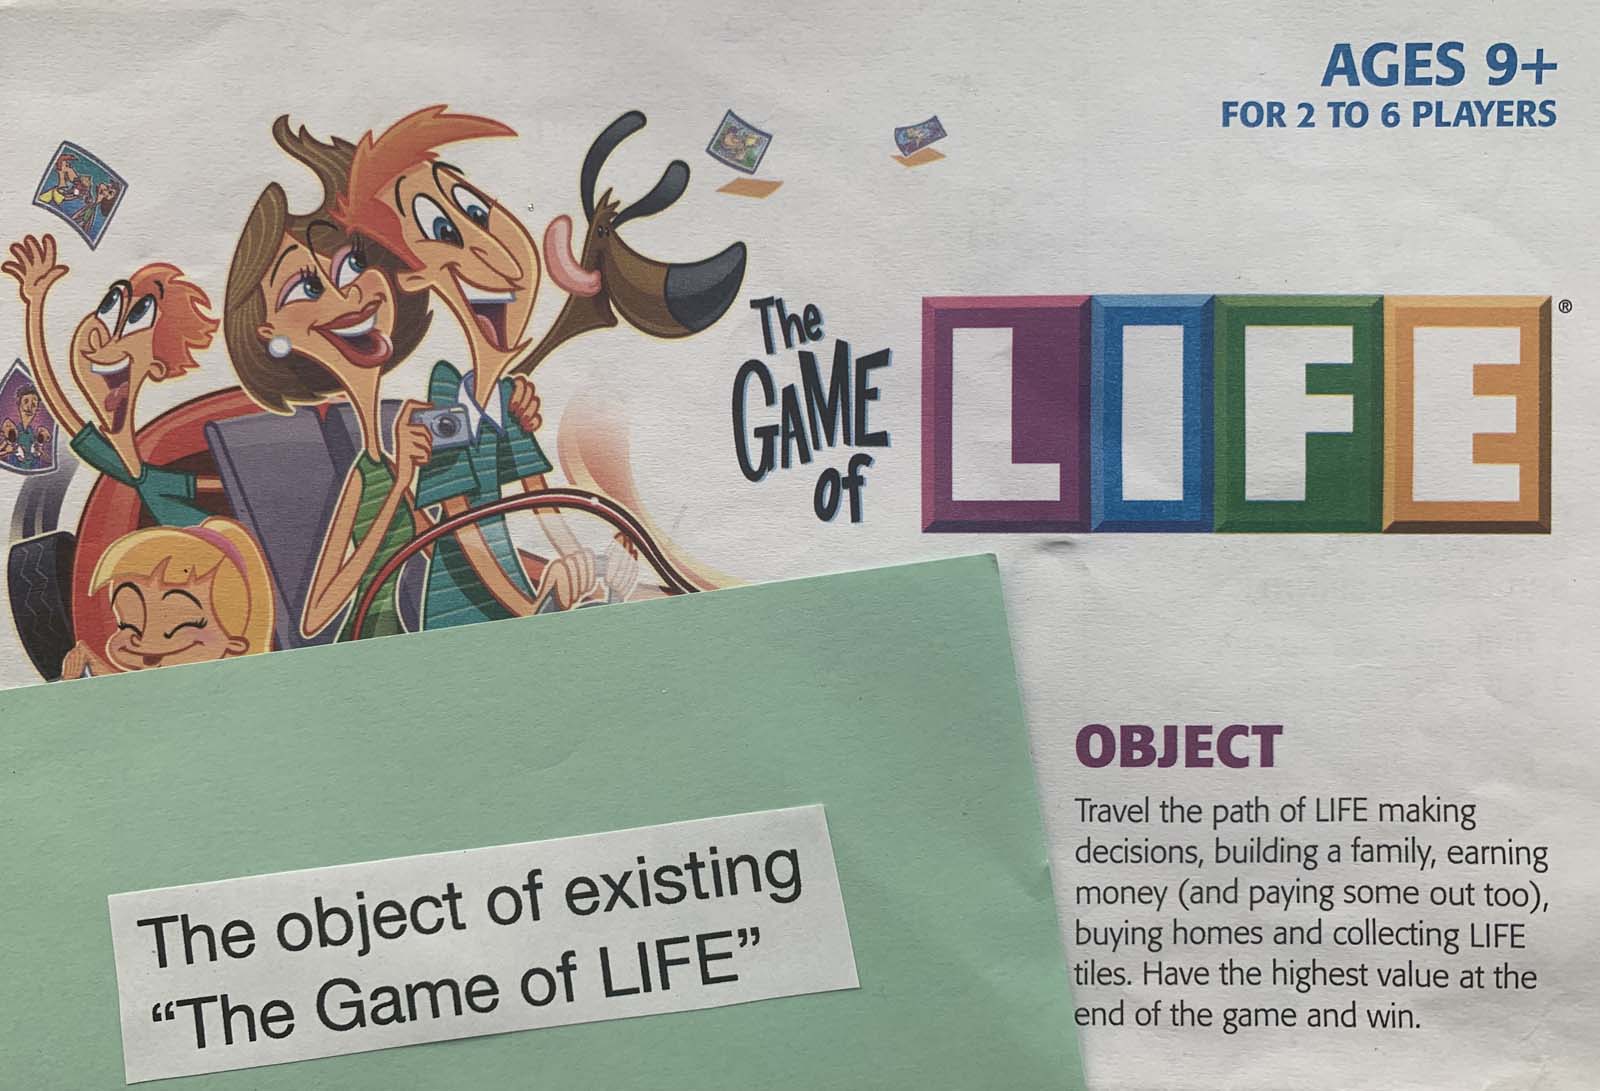 The Game of Life Reimagined by Life Reimagined Collaborative — Kickstarter